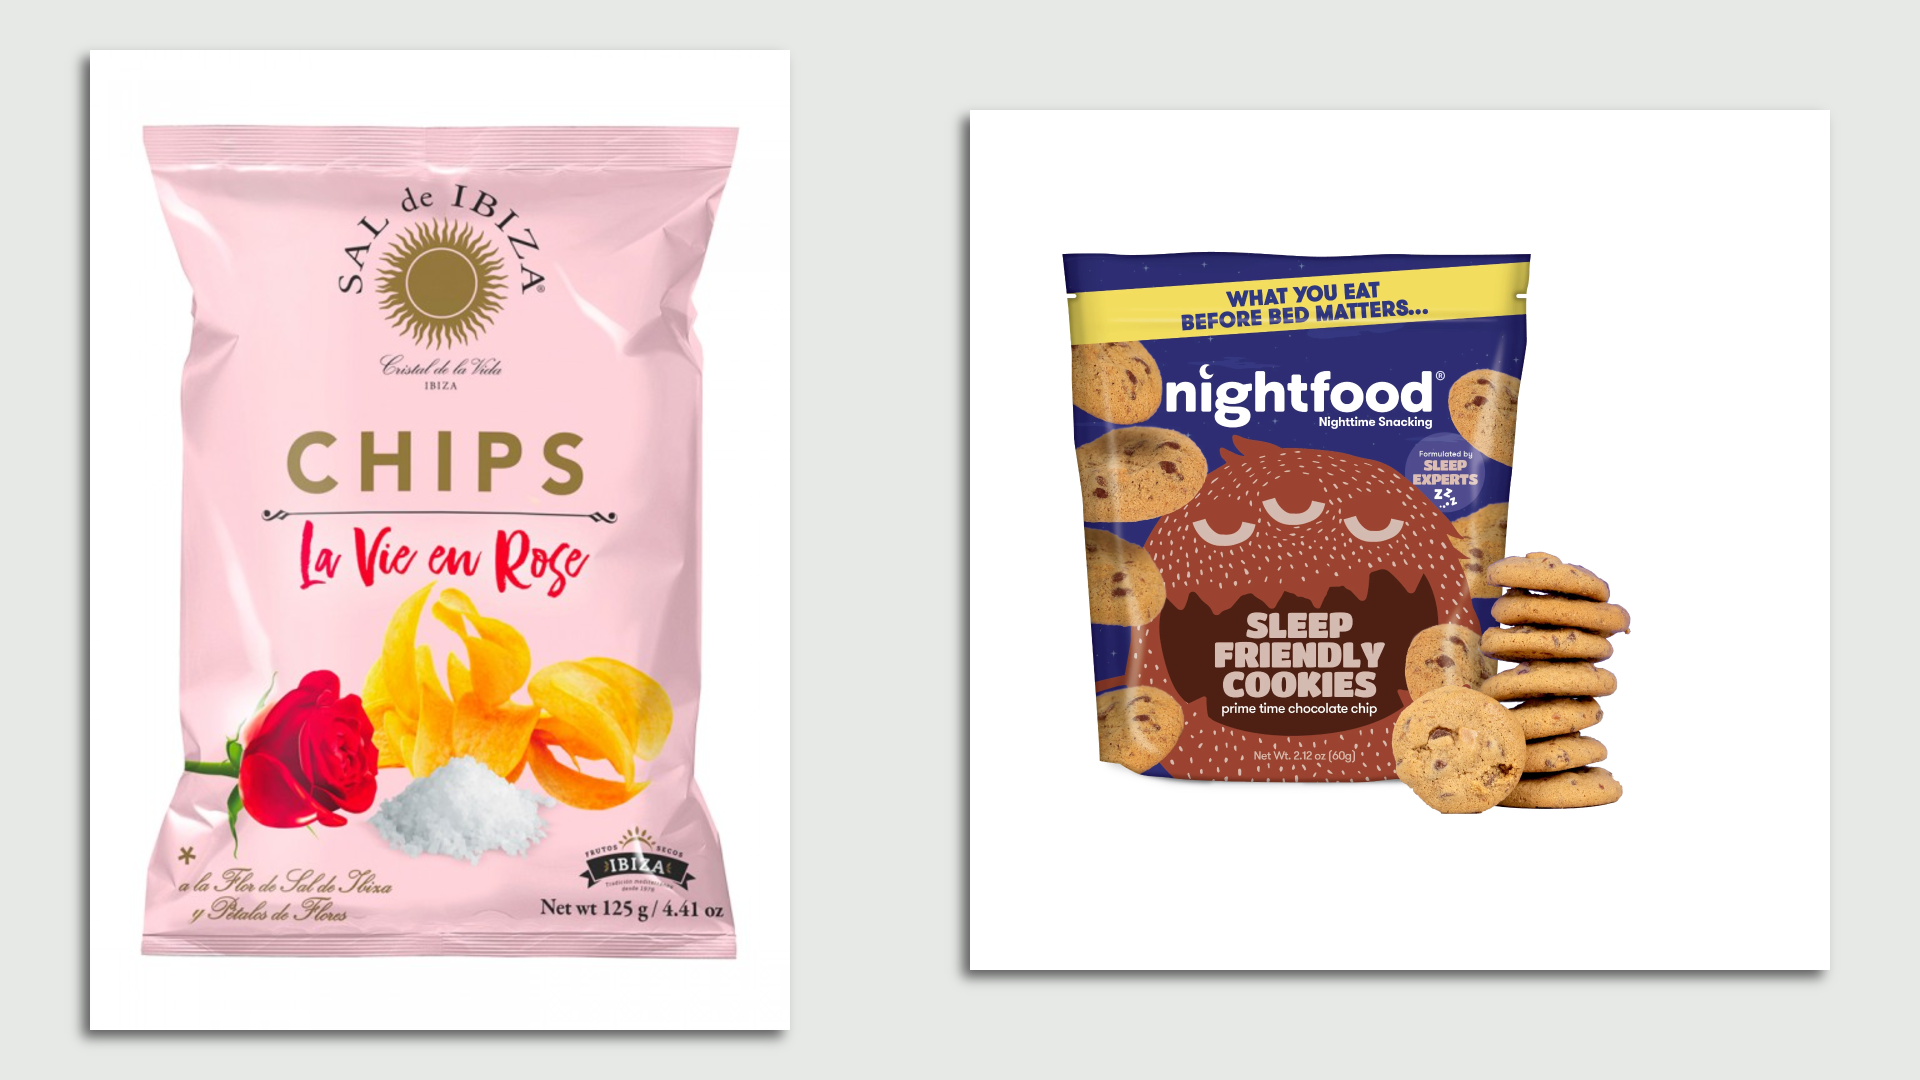 At left, a bag of rose-flavored potato chips; at right, a package of sleep-inducing cookies.